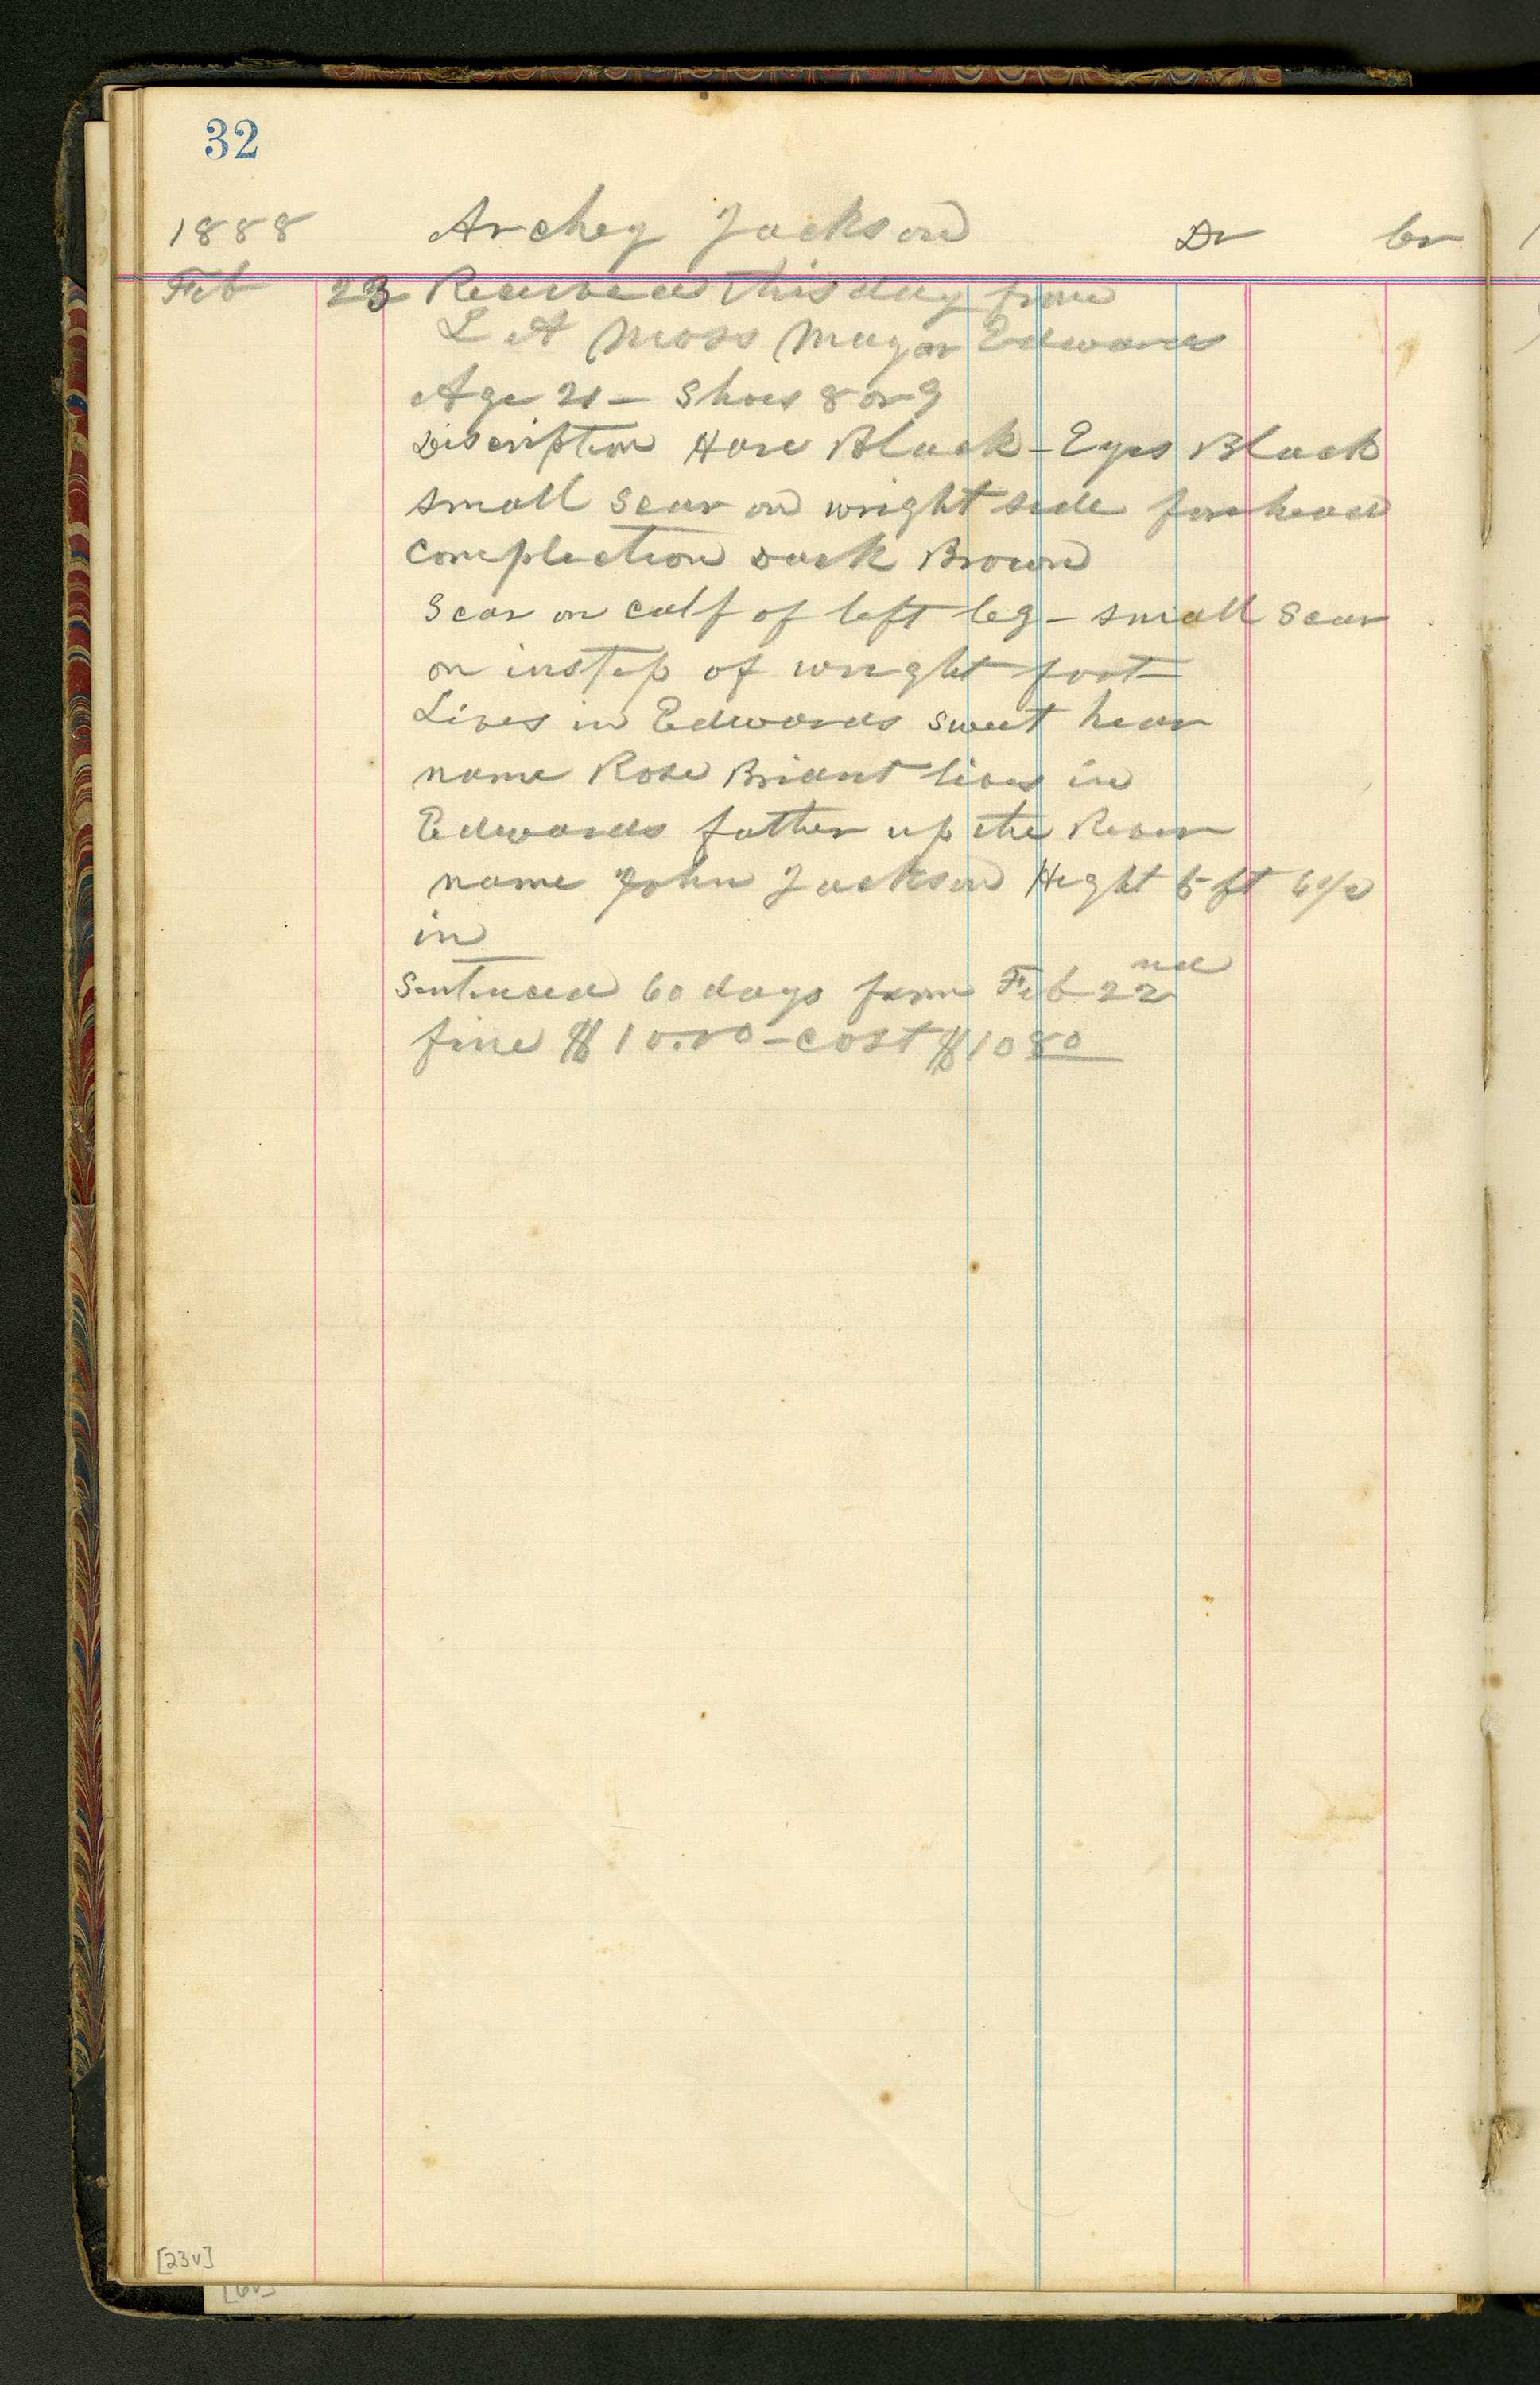 Page 32 of a ledger book. It is yellow lined and the top is filled out with curve writing in pencil.